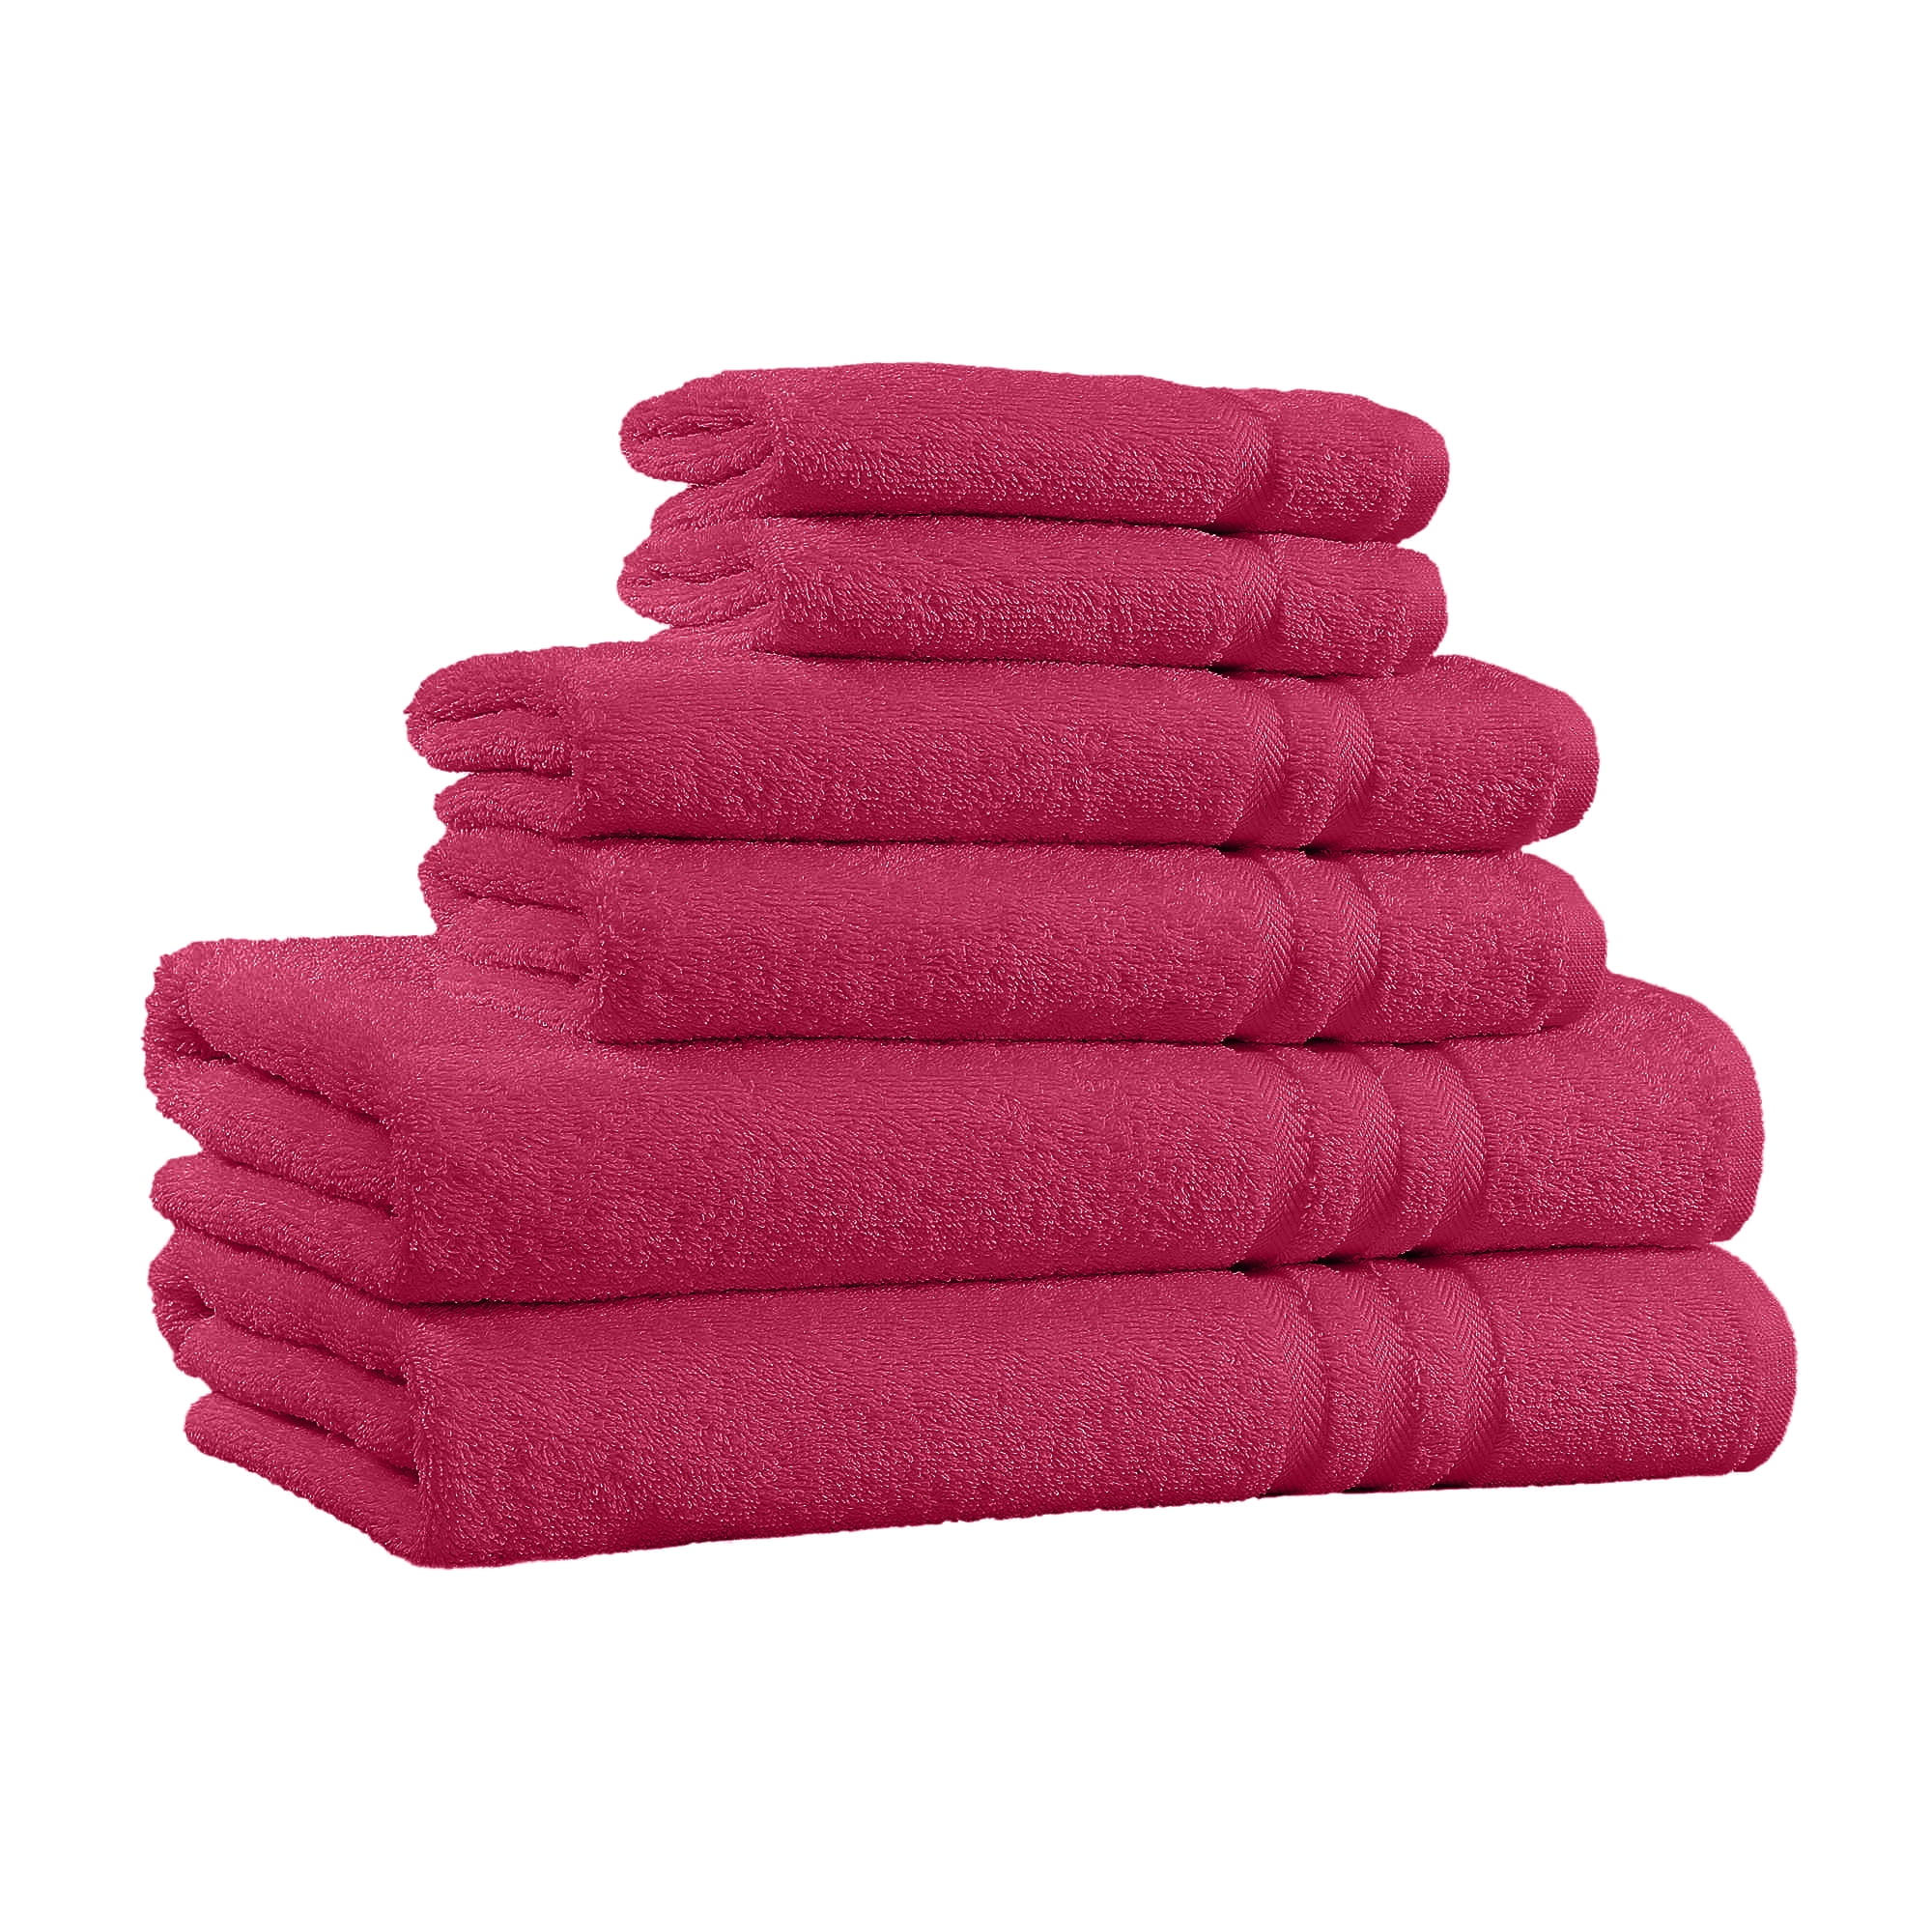 100% Cotton 6PC Bath Towel Set Luxury Hotel Quality Ultra Soft Highly Absorbent 